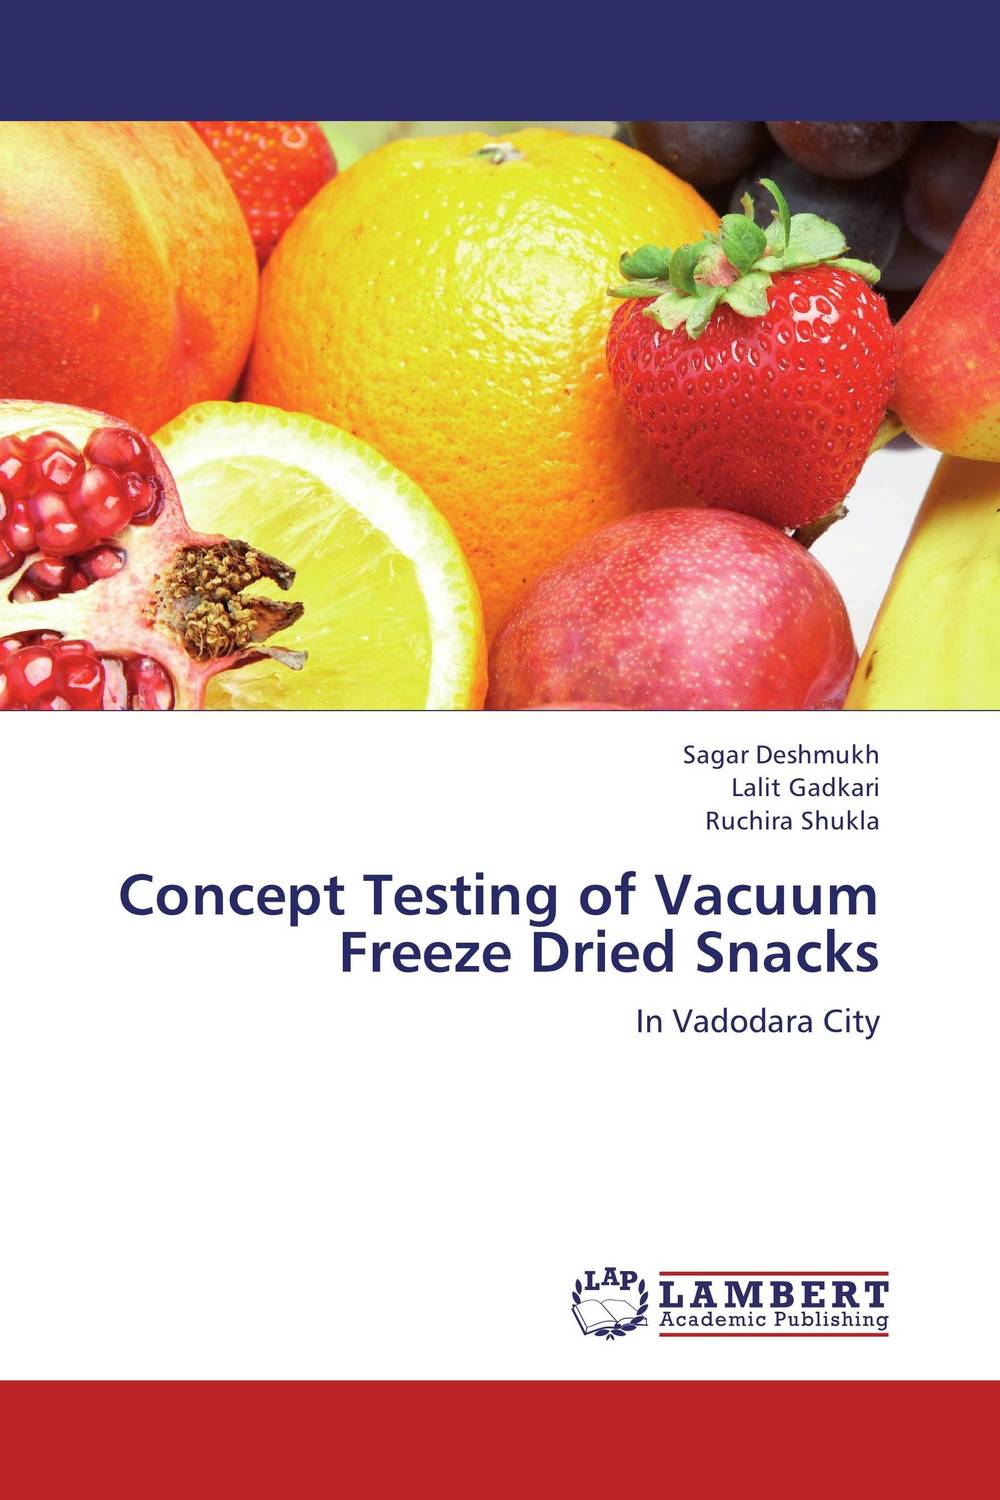 Concept Testing of Vacuum Freeze Dried Snacks